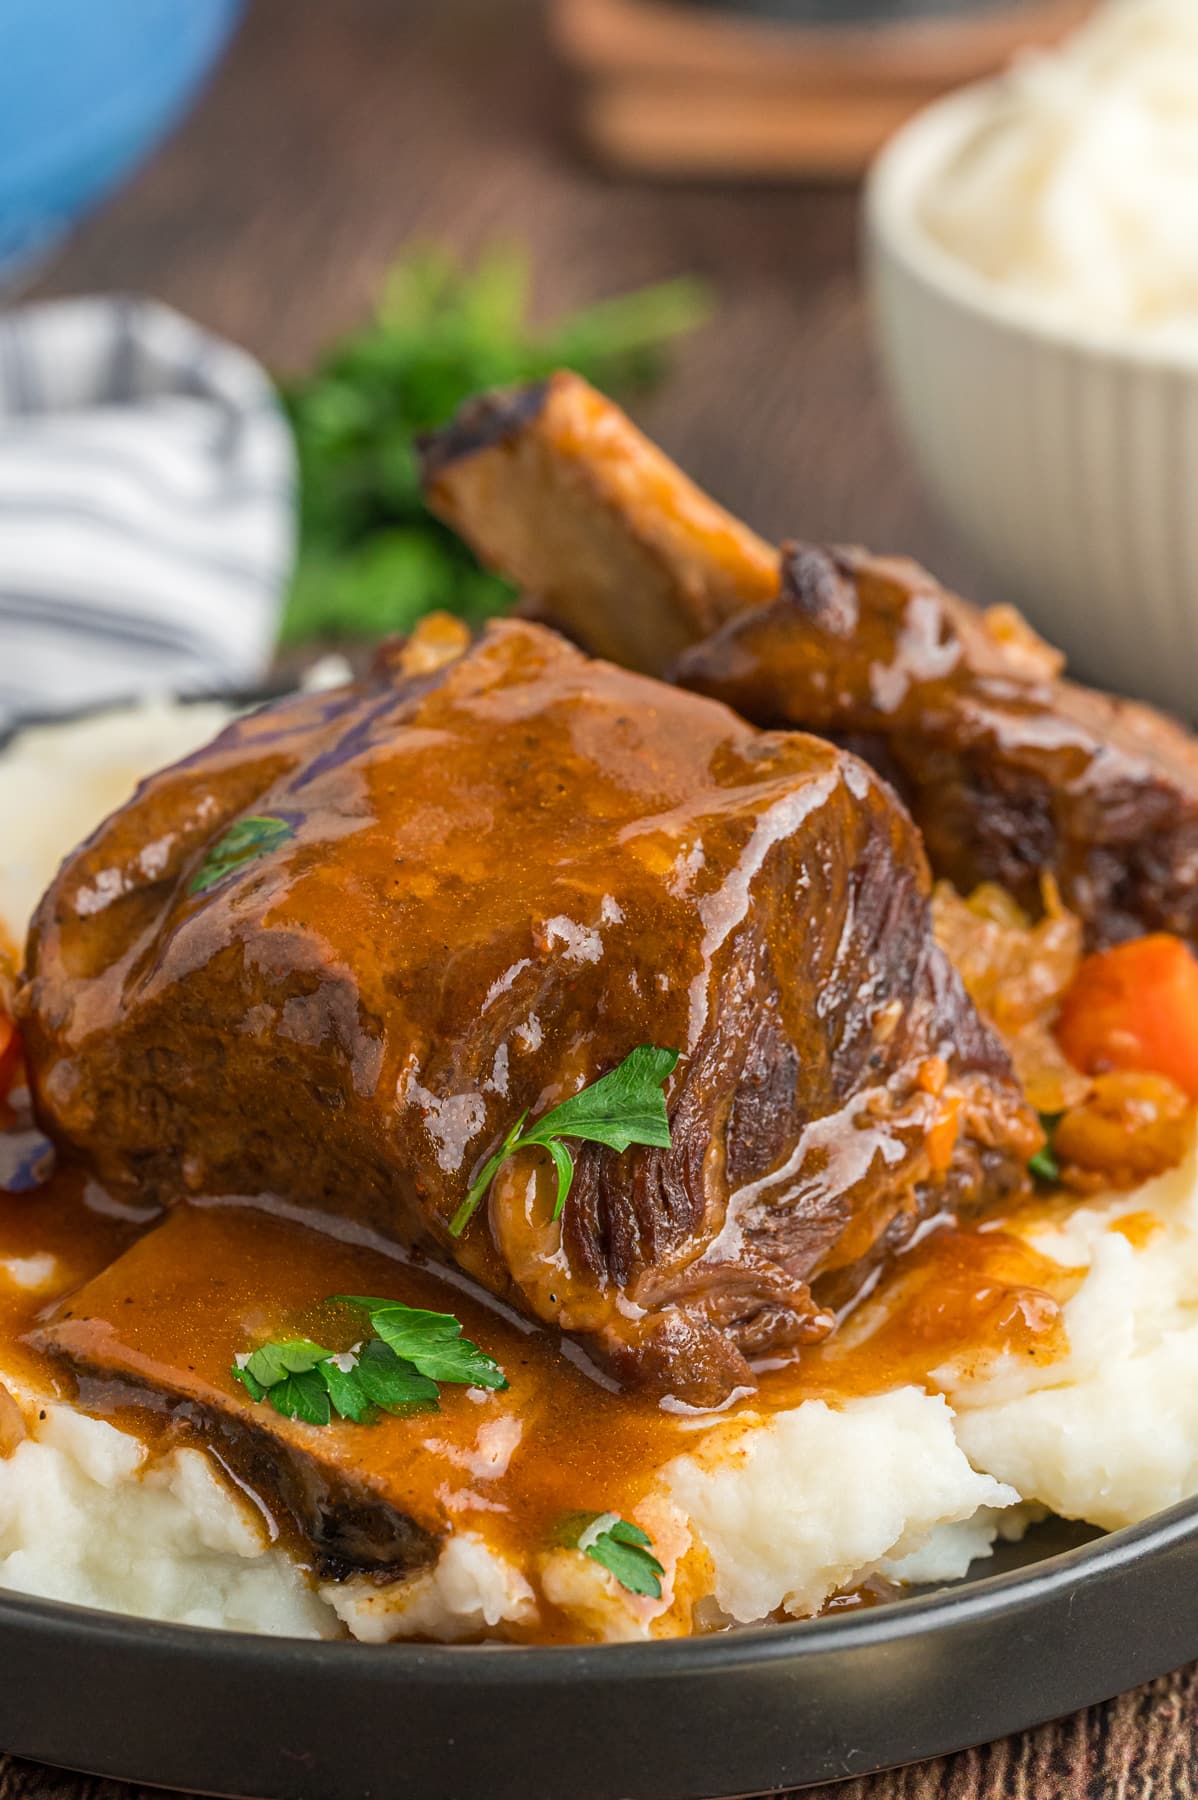 Braised short ribs over mashed potatoes